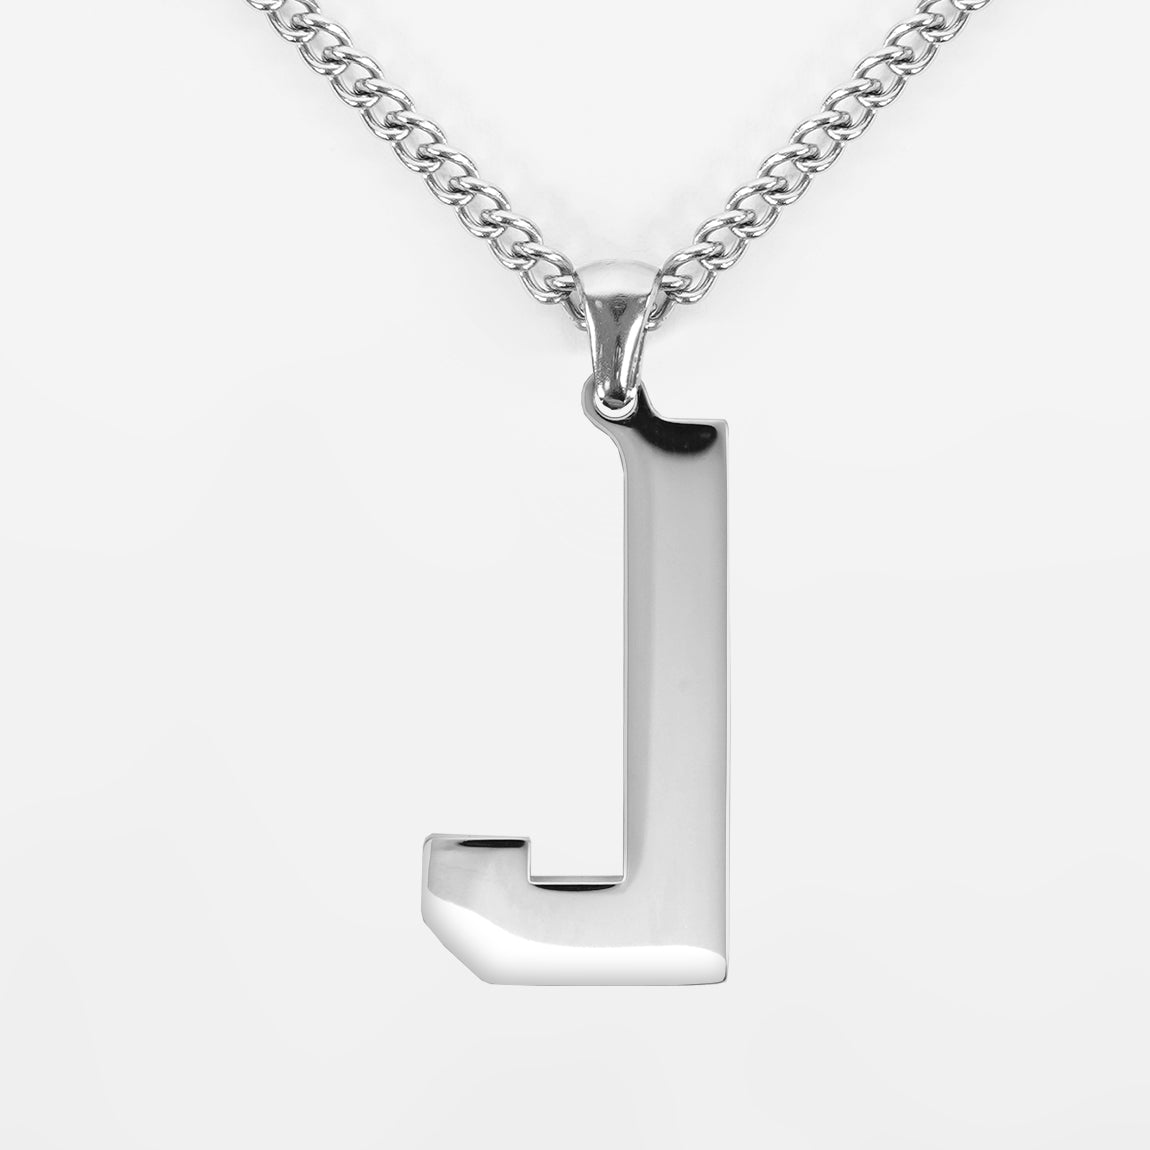 J Letter Pendant with Chain Necklace - Stainless Steel